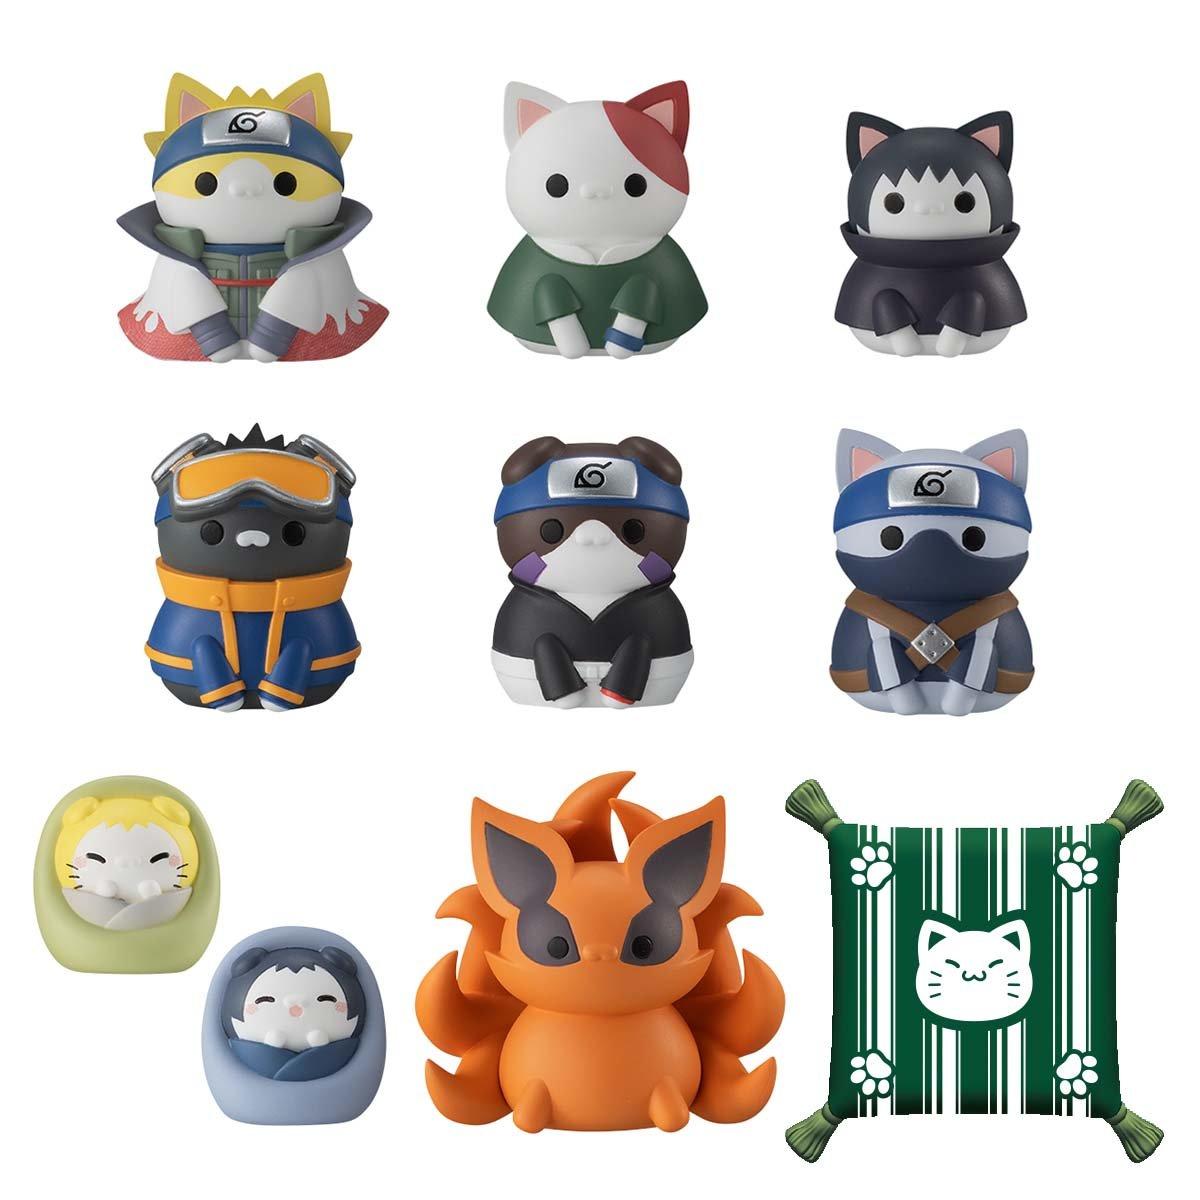 MegaHouse Mega Cat Project Nyaruto Naruto Shippuden Once Upon A Time in Konoha Set of 8 1.1-in Figures with Bonus Mini Cushion (GameStop)